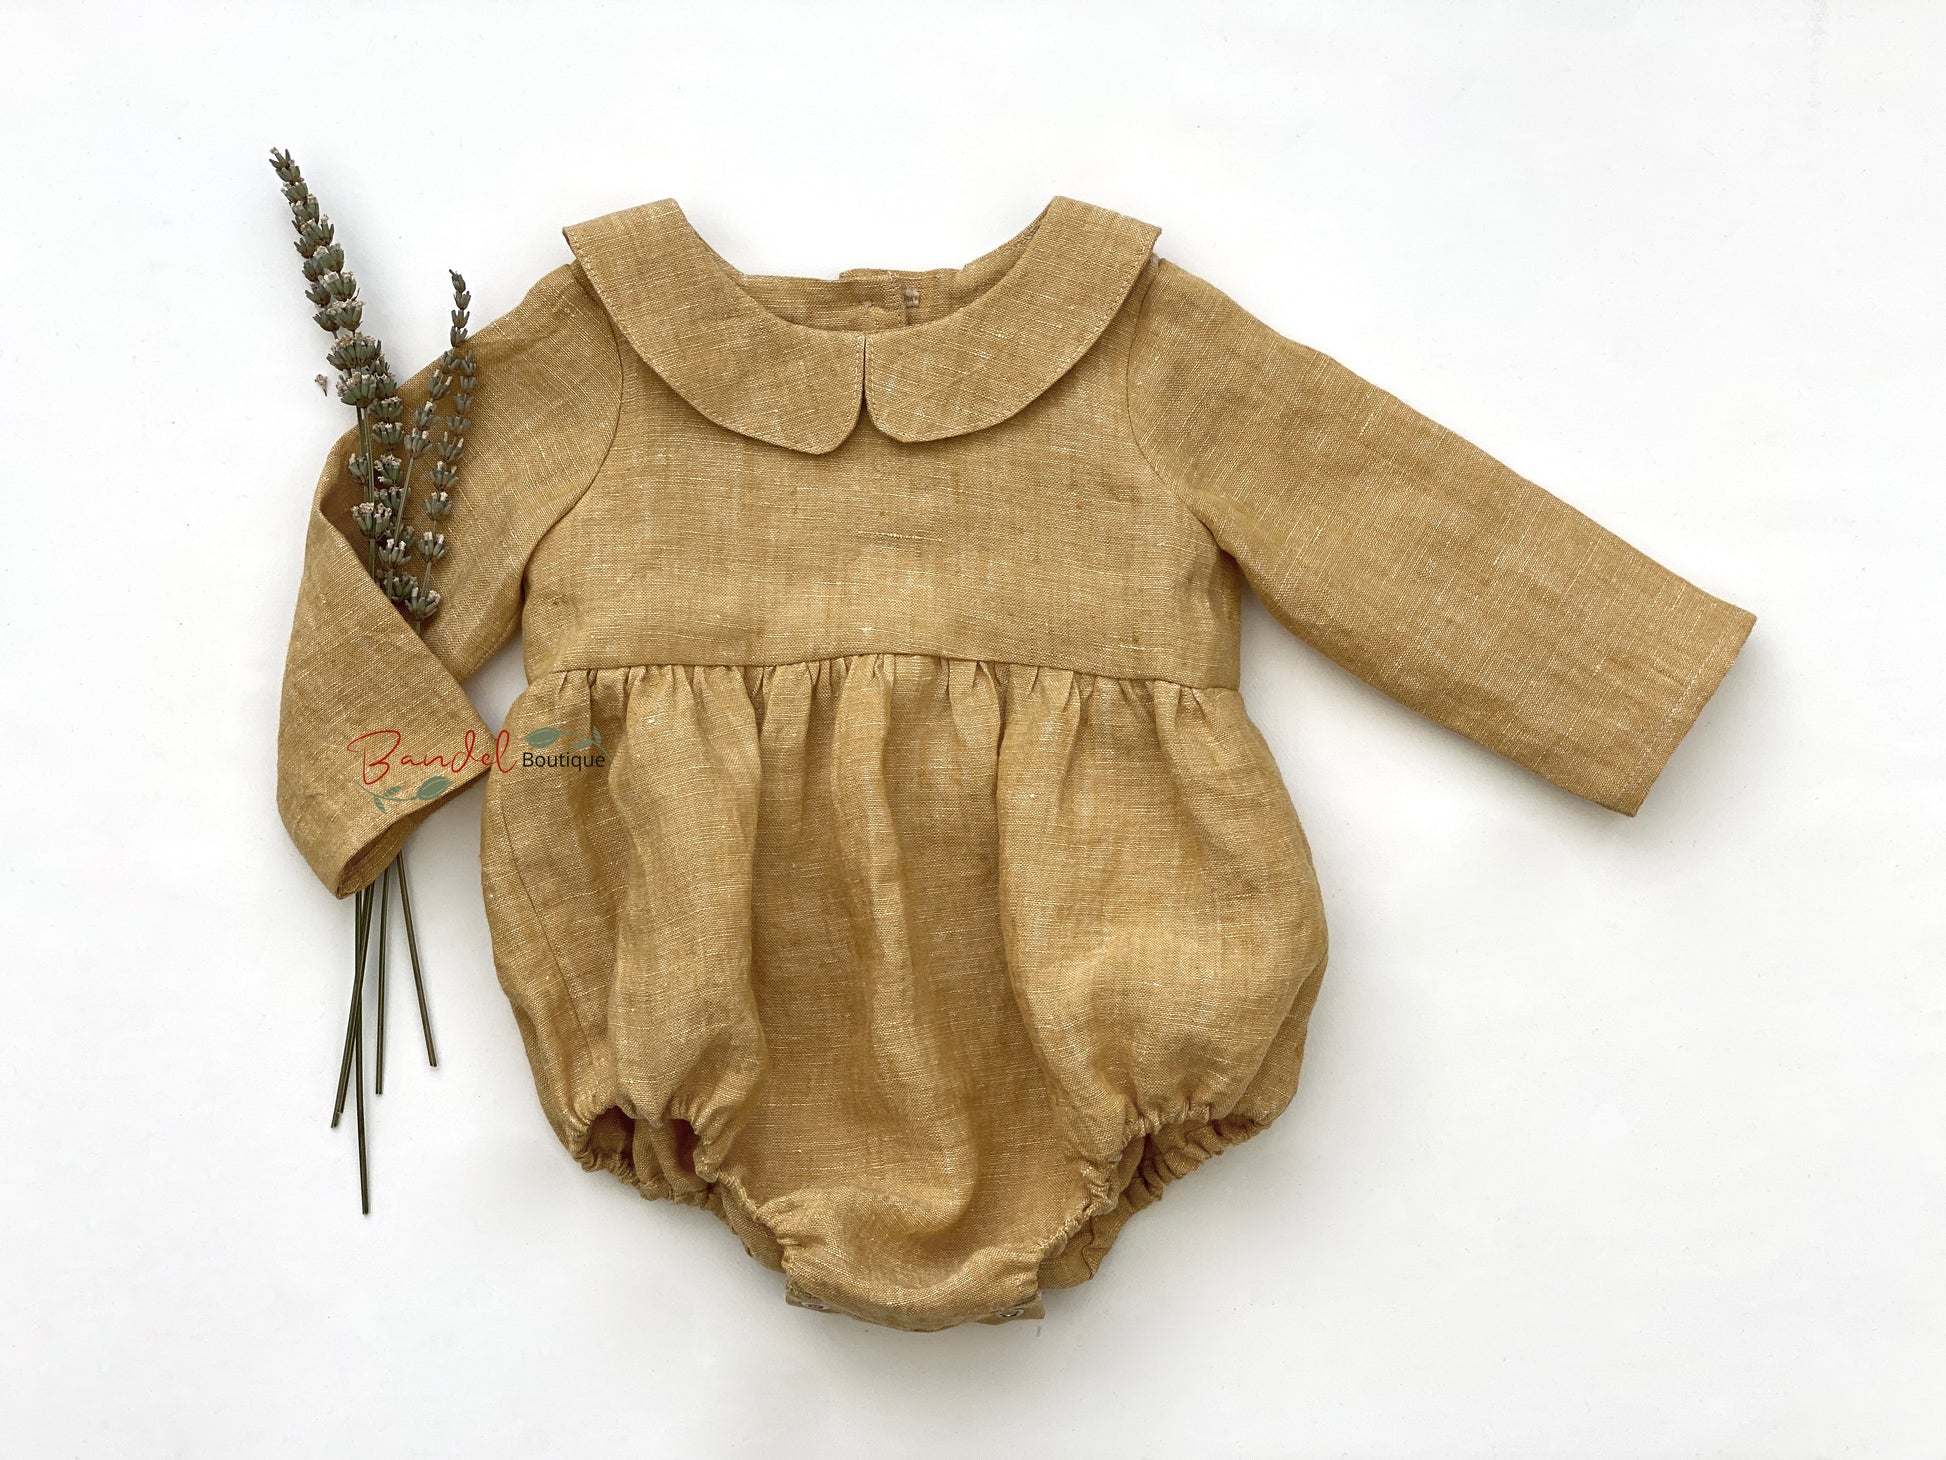 This stylish ocher yellow linen romper is perfect for your baby's wardrobe. Crafted from durable and soft linen, this romper features long sleeves, a peter pan collar, and snaps at the crotch for easy changes. Its classic design will ensure your baby looks stylish while feeling comfortable.